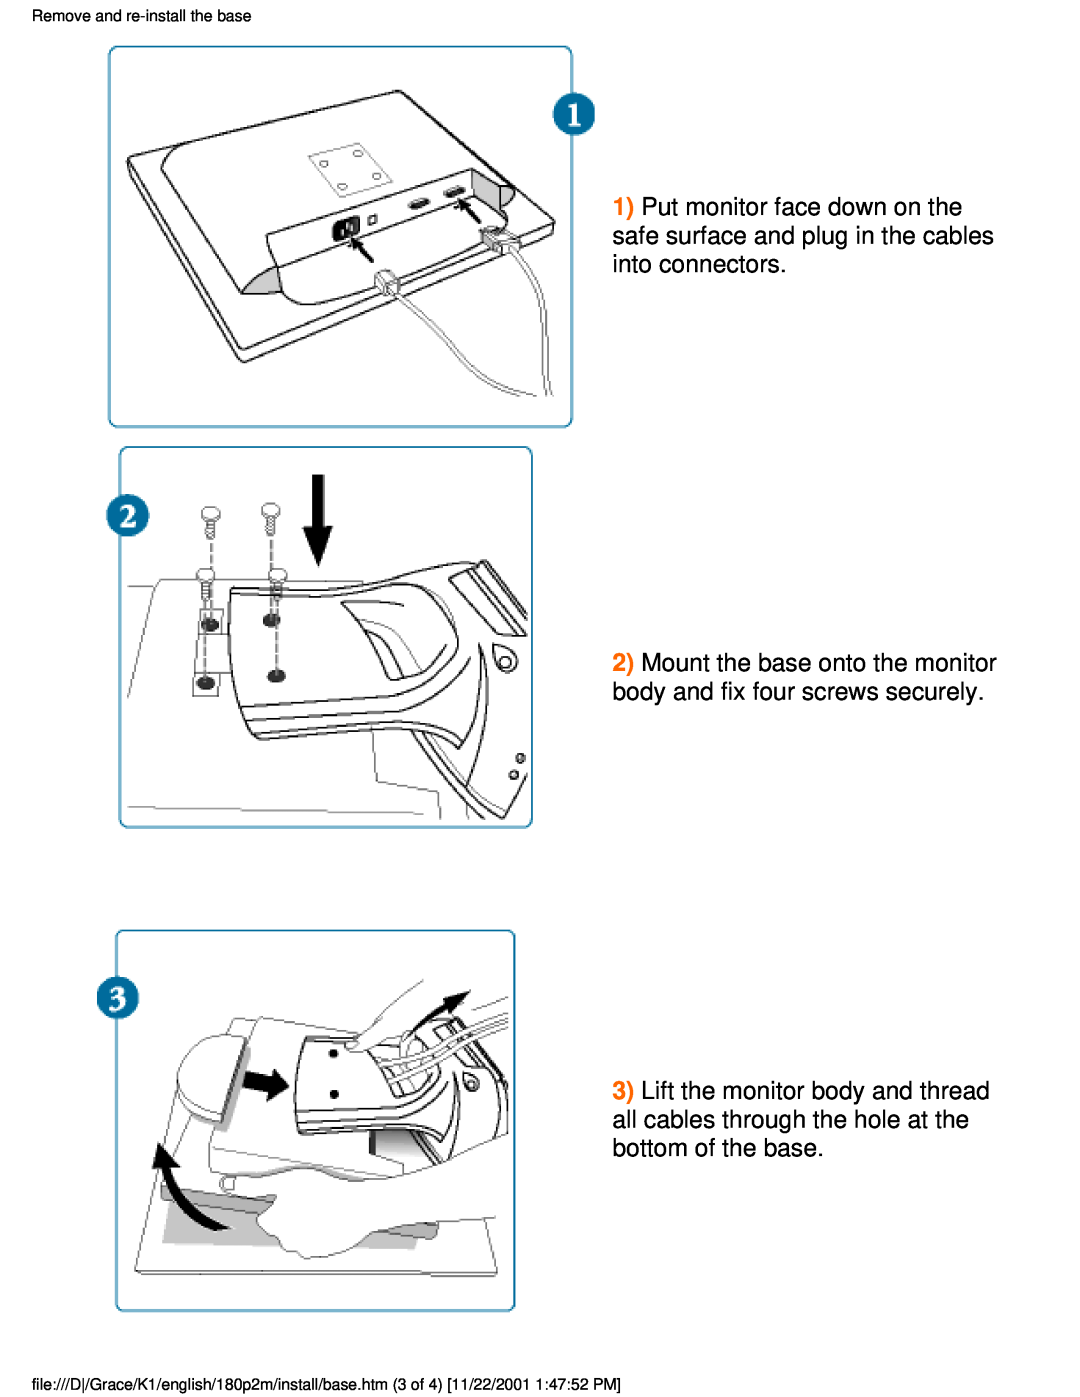 Philips 180P2M user manual Mount the base onto the monitor body and fix four screws securely 